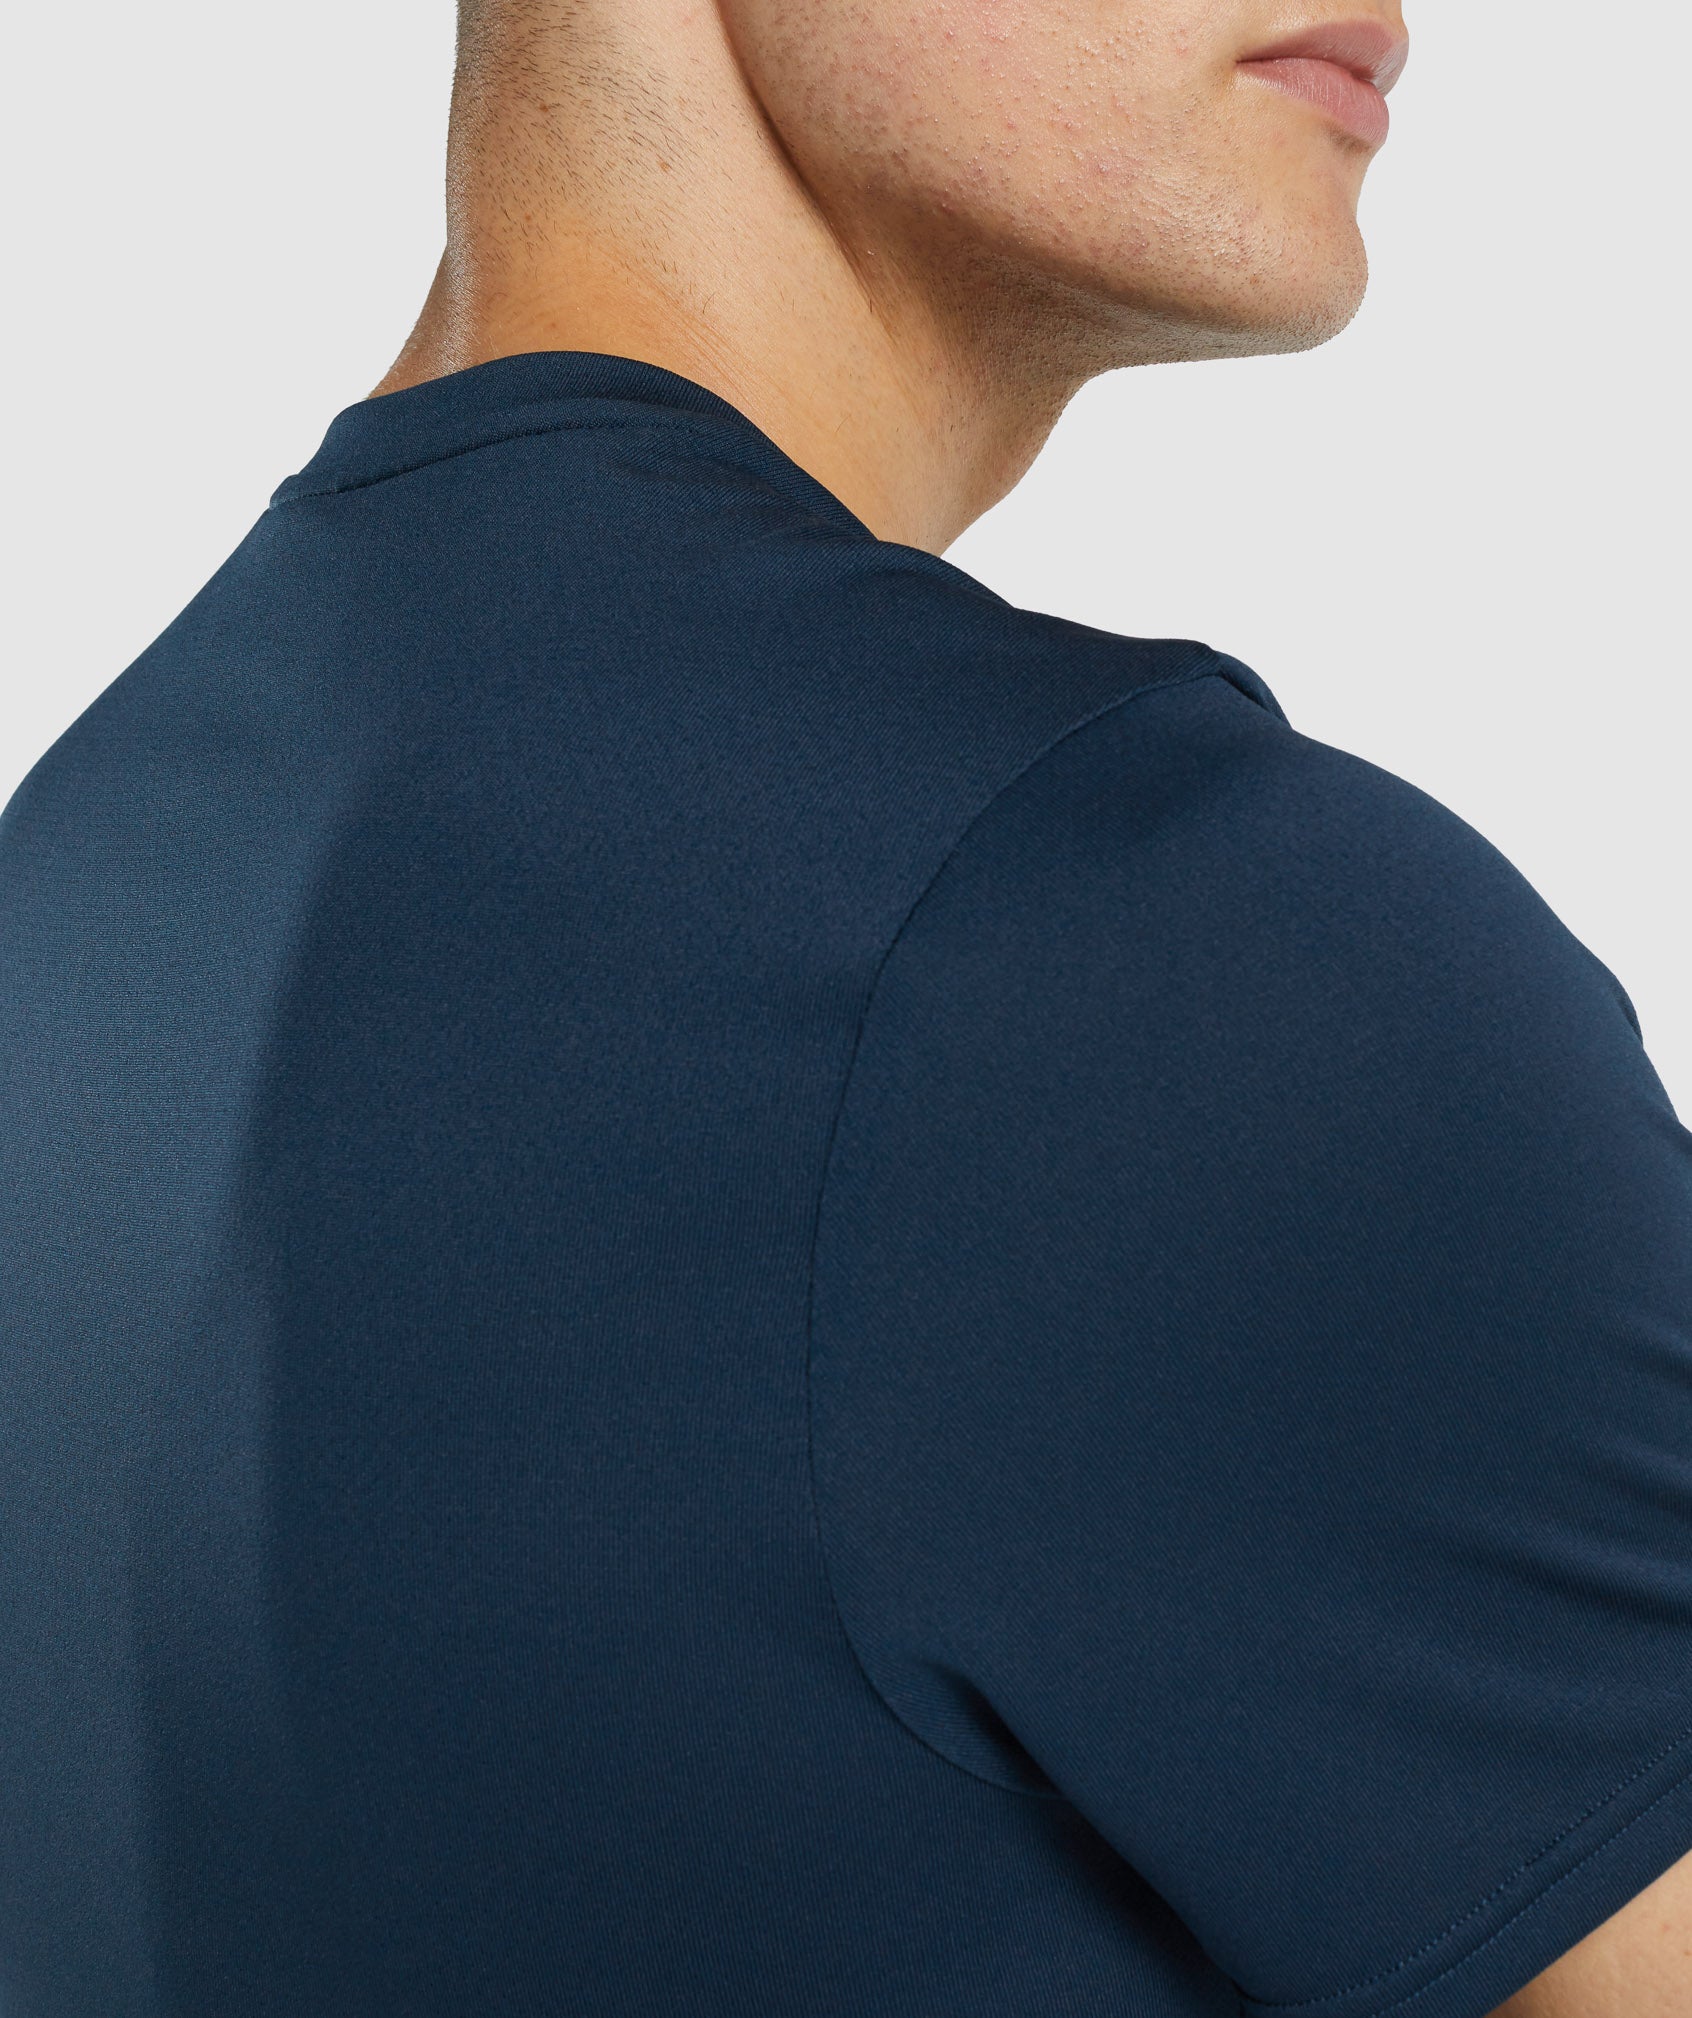 Arrival Regular Fit T-Shirt in Navy - view 5